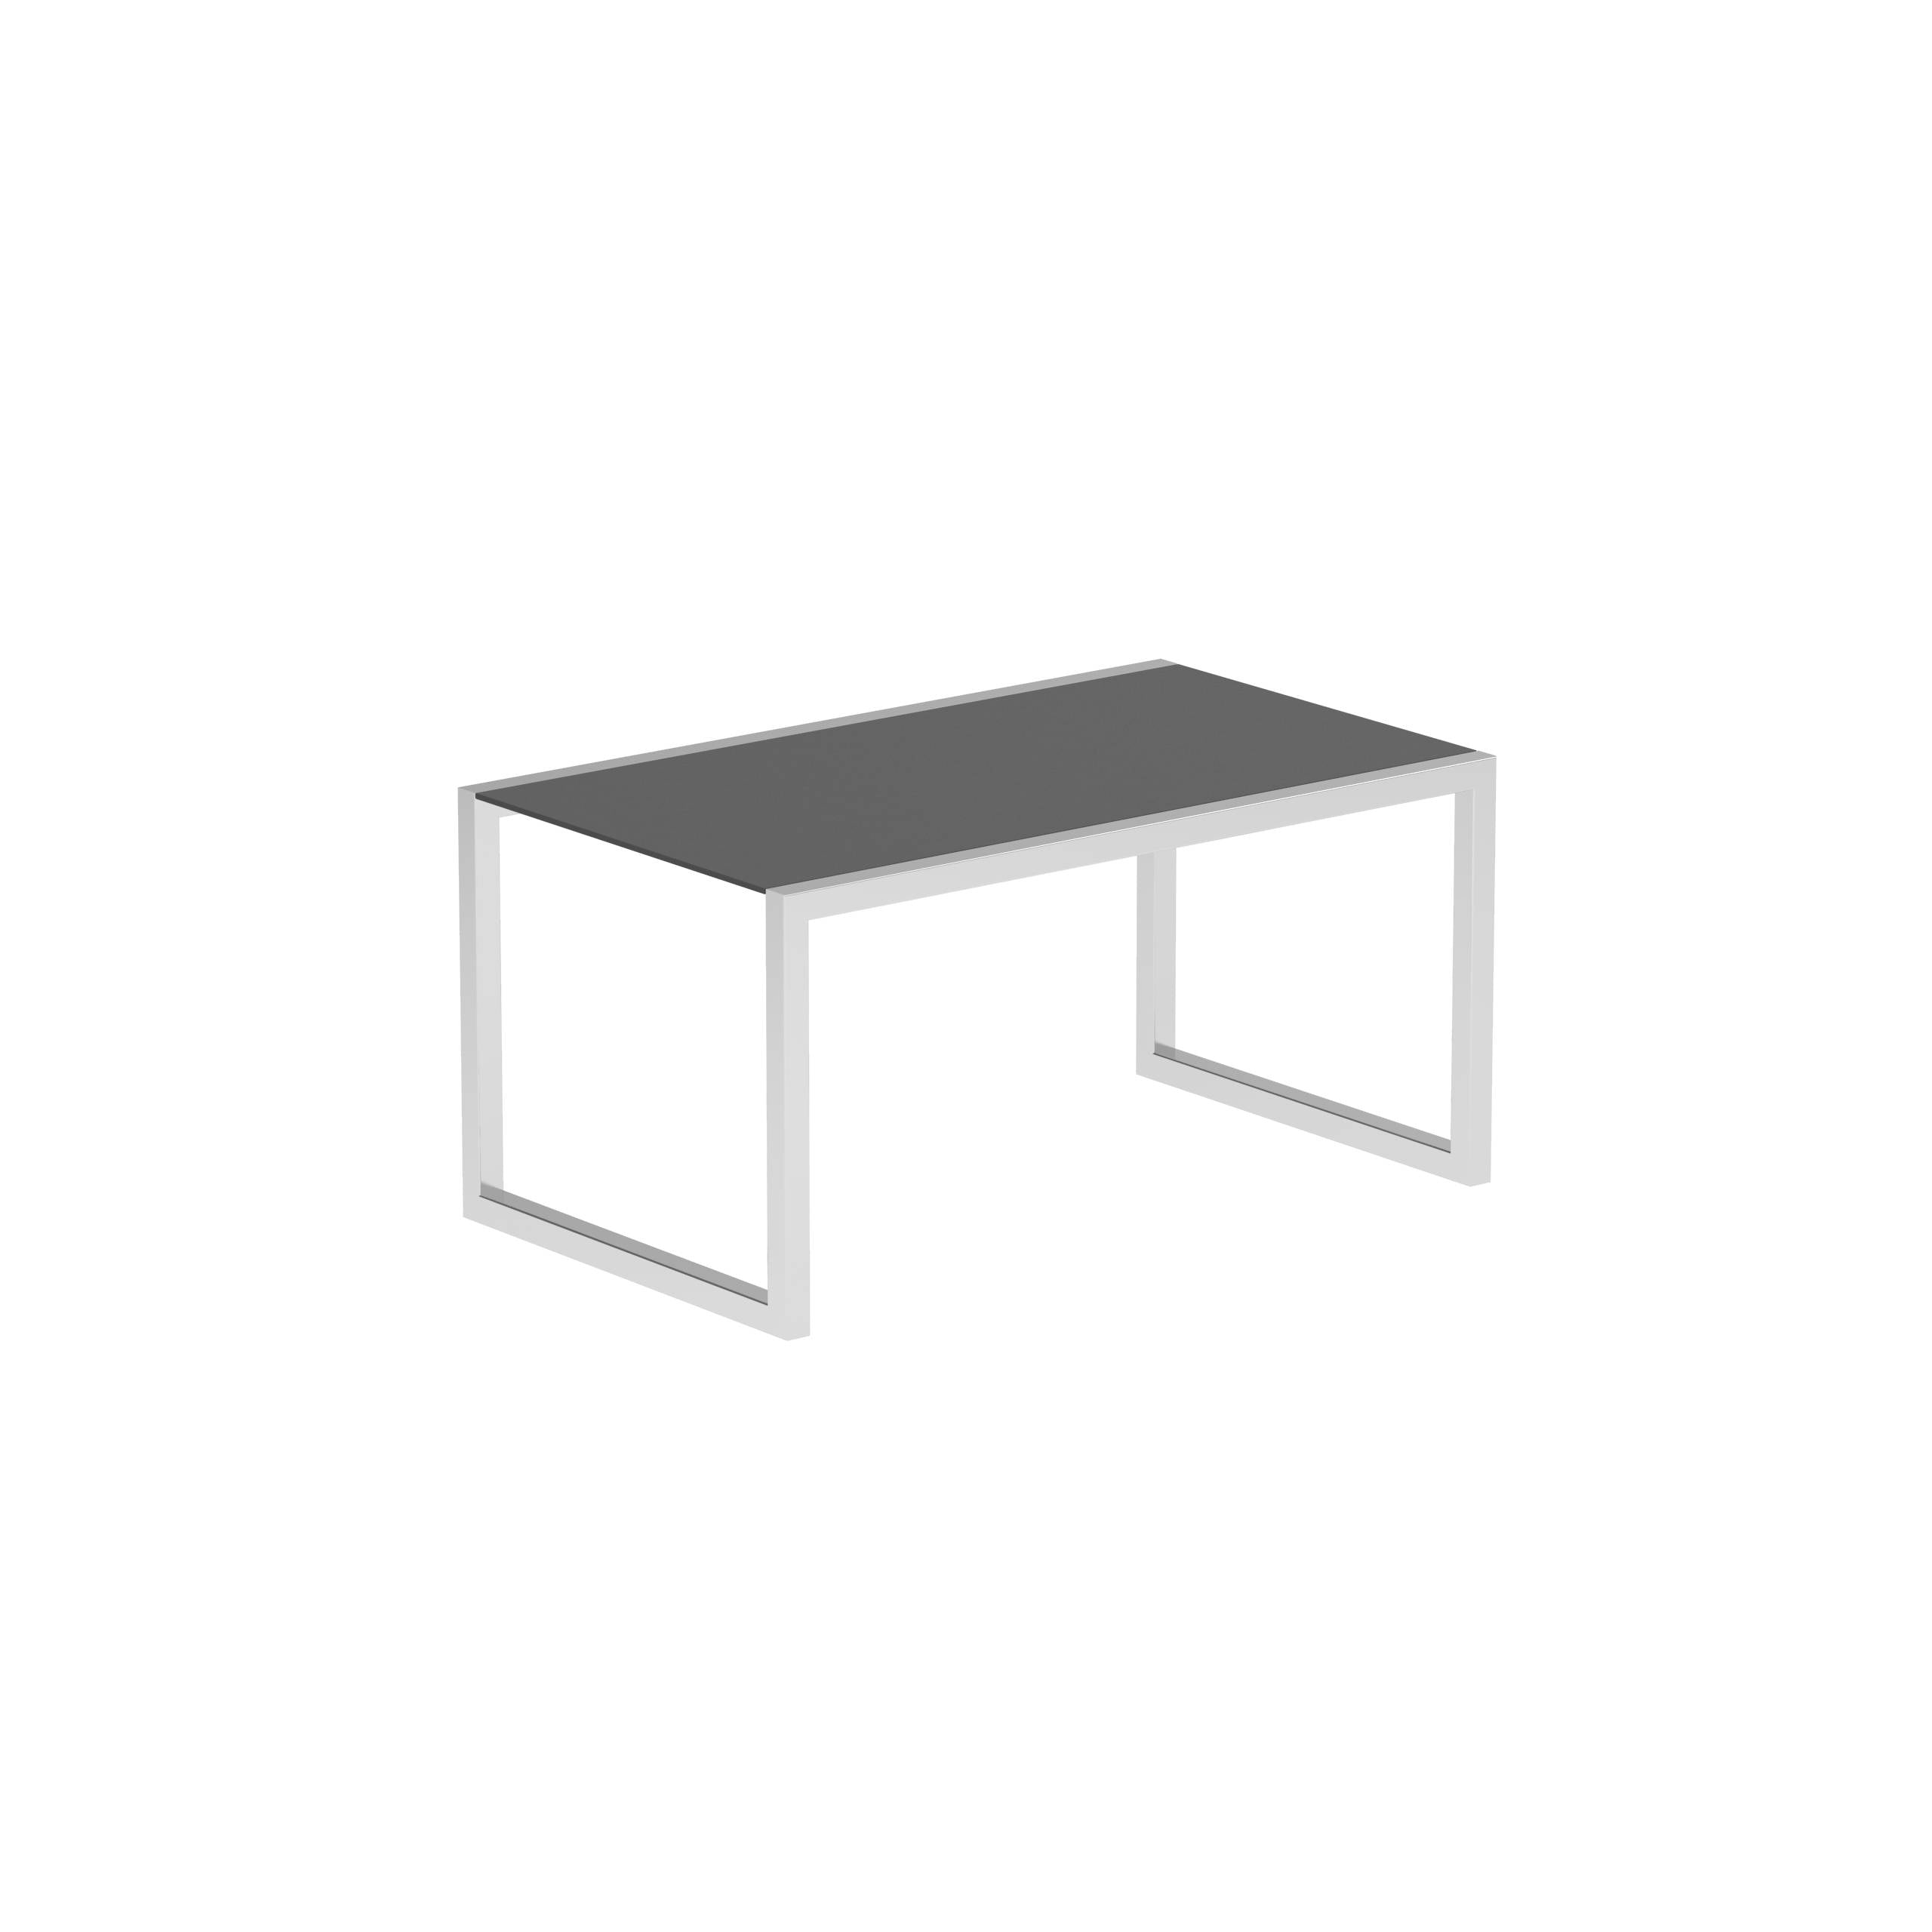 Ninix Table 150x90 Cm With Stainless Steel El.Pol And Ceramic Top Black